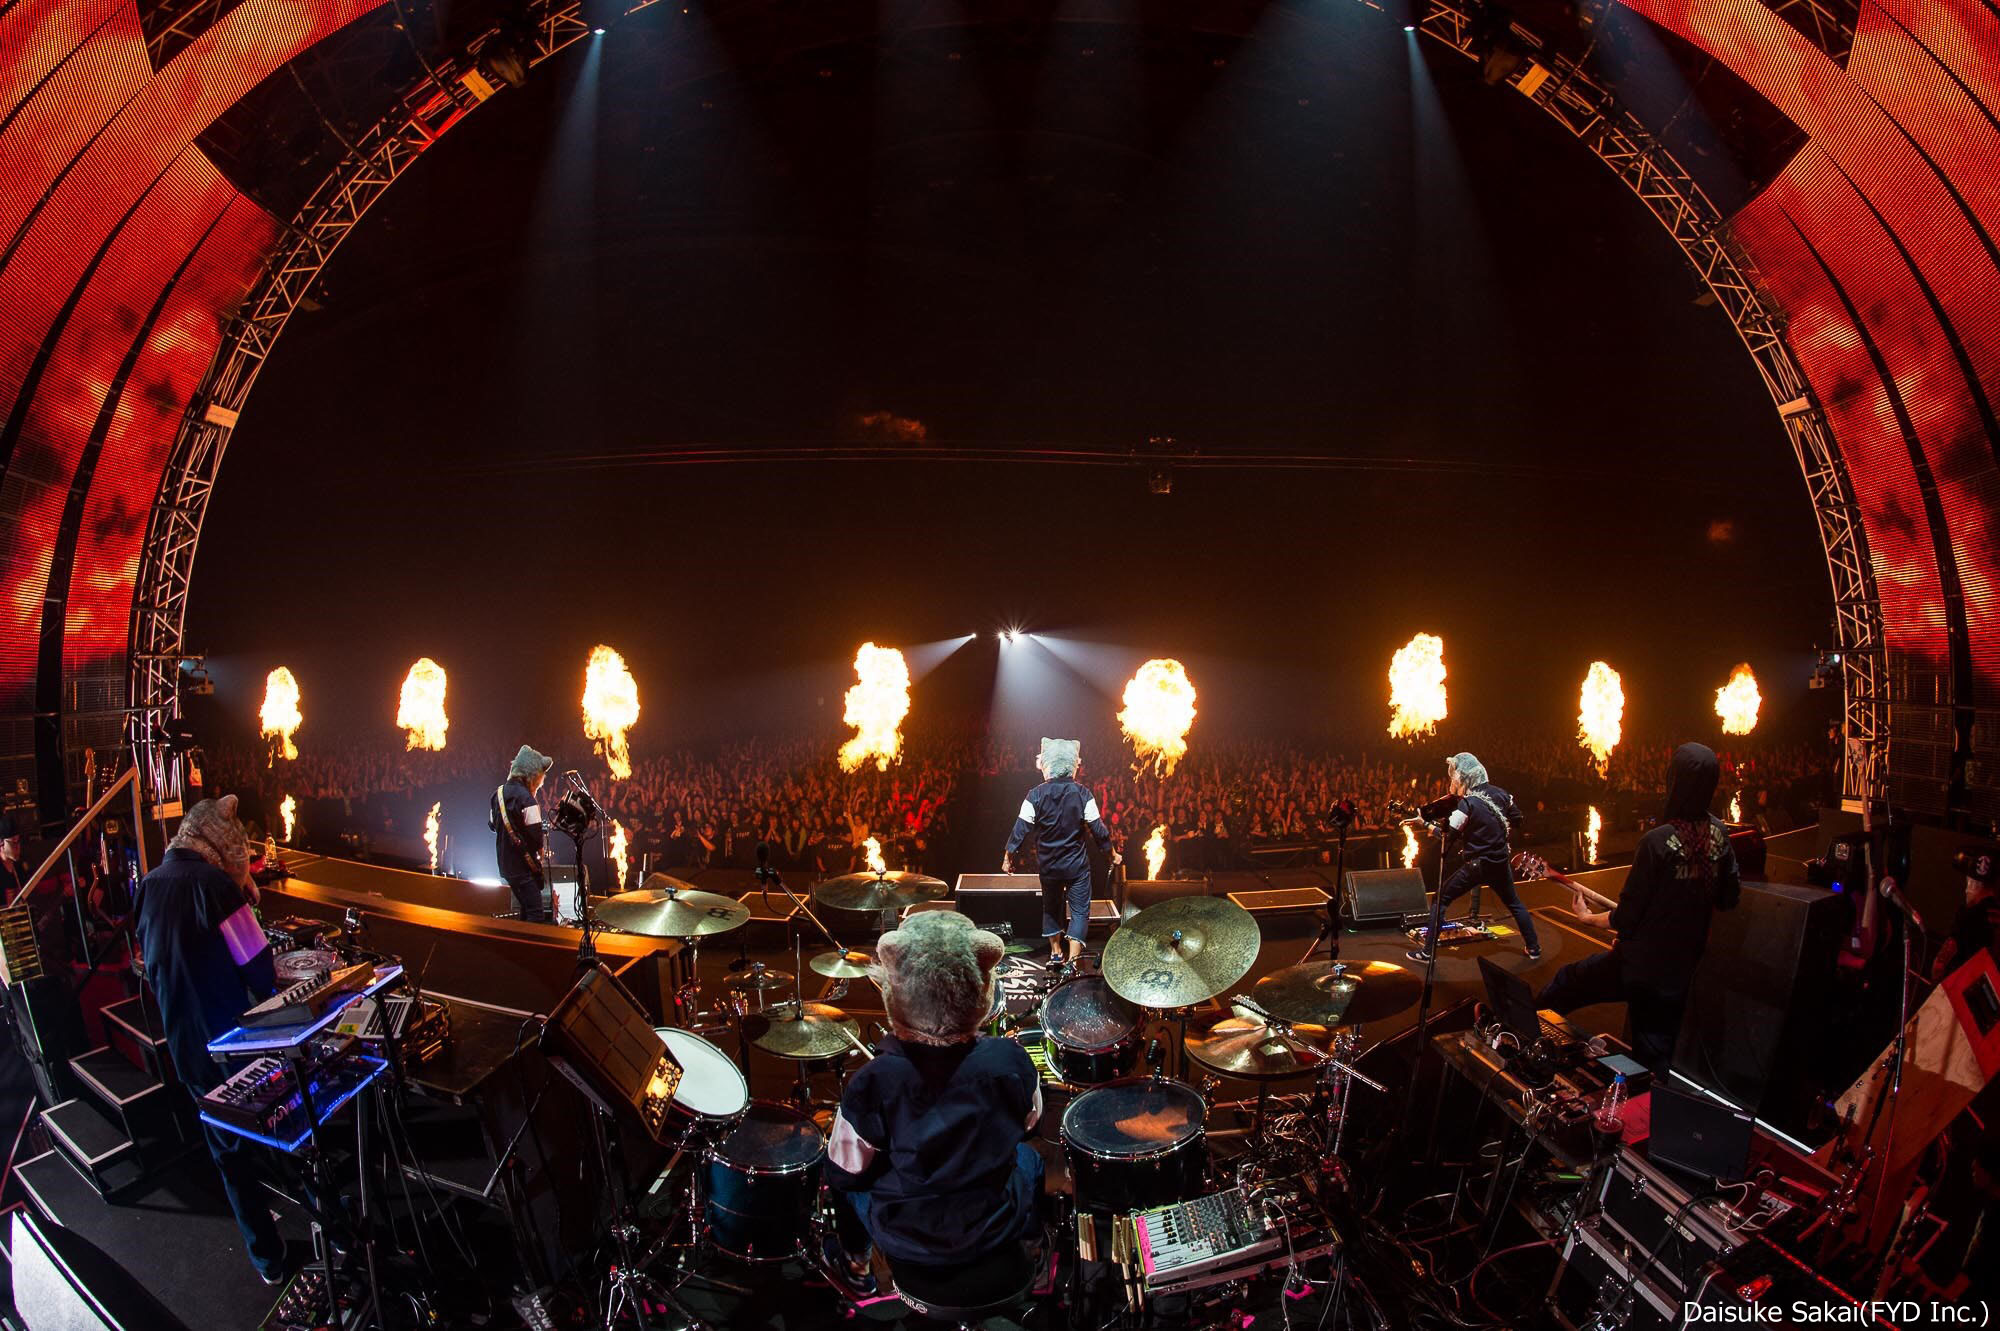 Man With A Mission Presents The World S On Fire Tour 16 At Portmesse Nagoya 放送を前にライブダイジェスト映像到着 株式会社wowowのプレスリリース